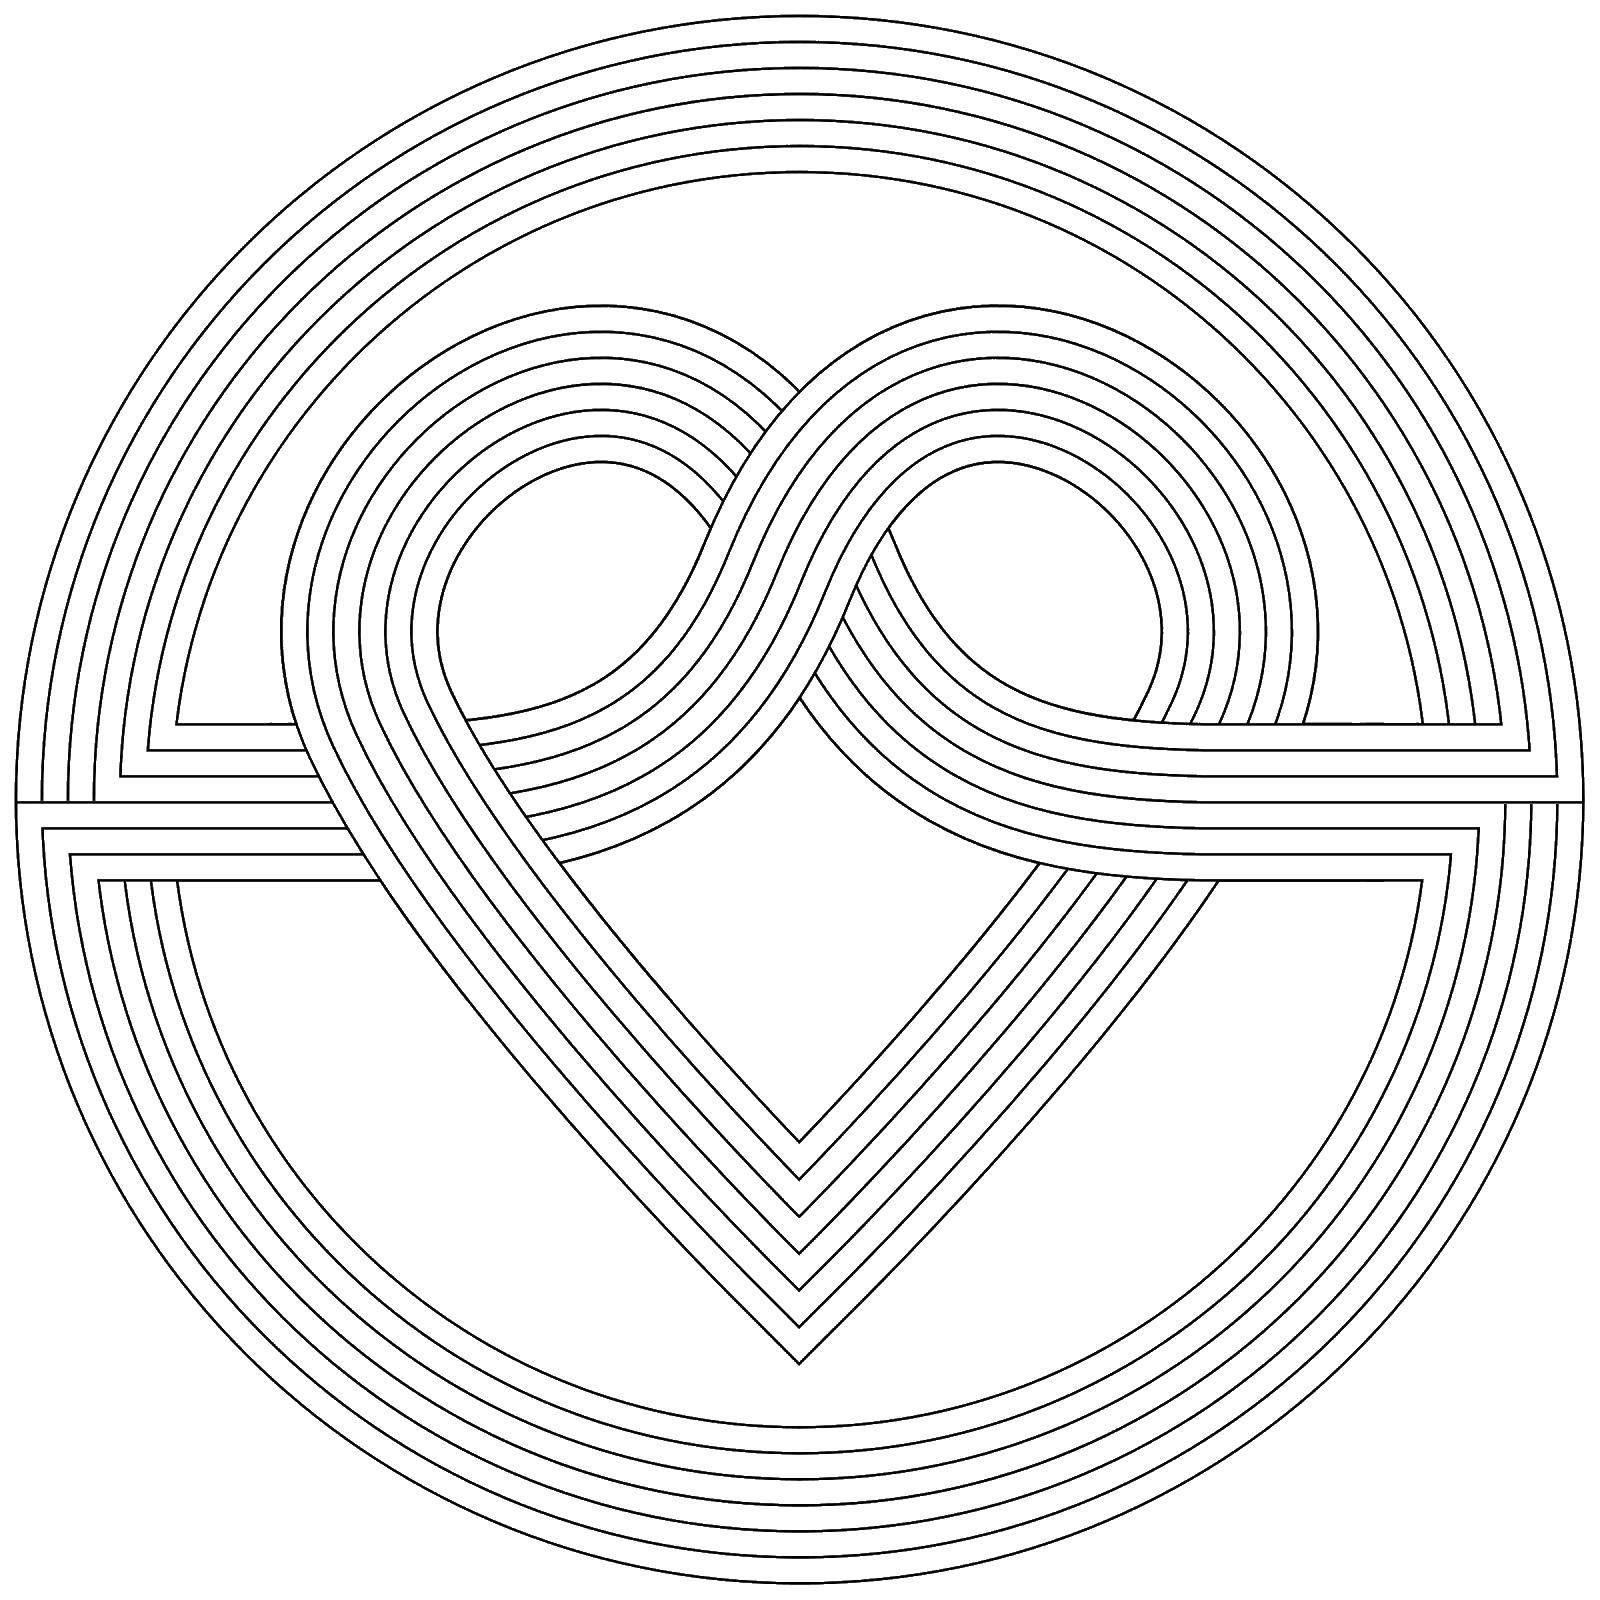 Coloring Pattern heart. Category patterns. Tags:  pattern .